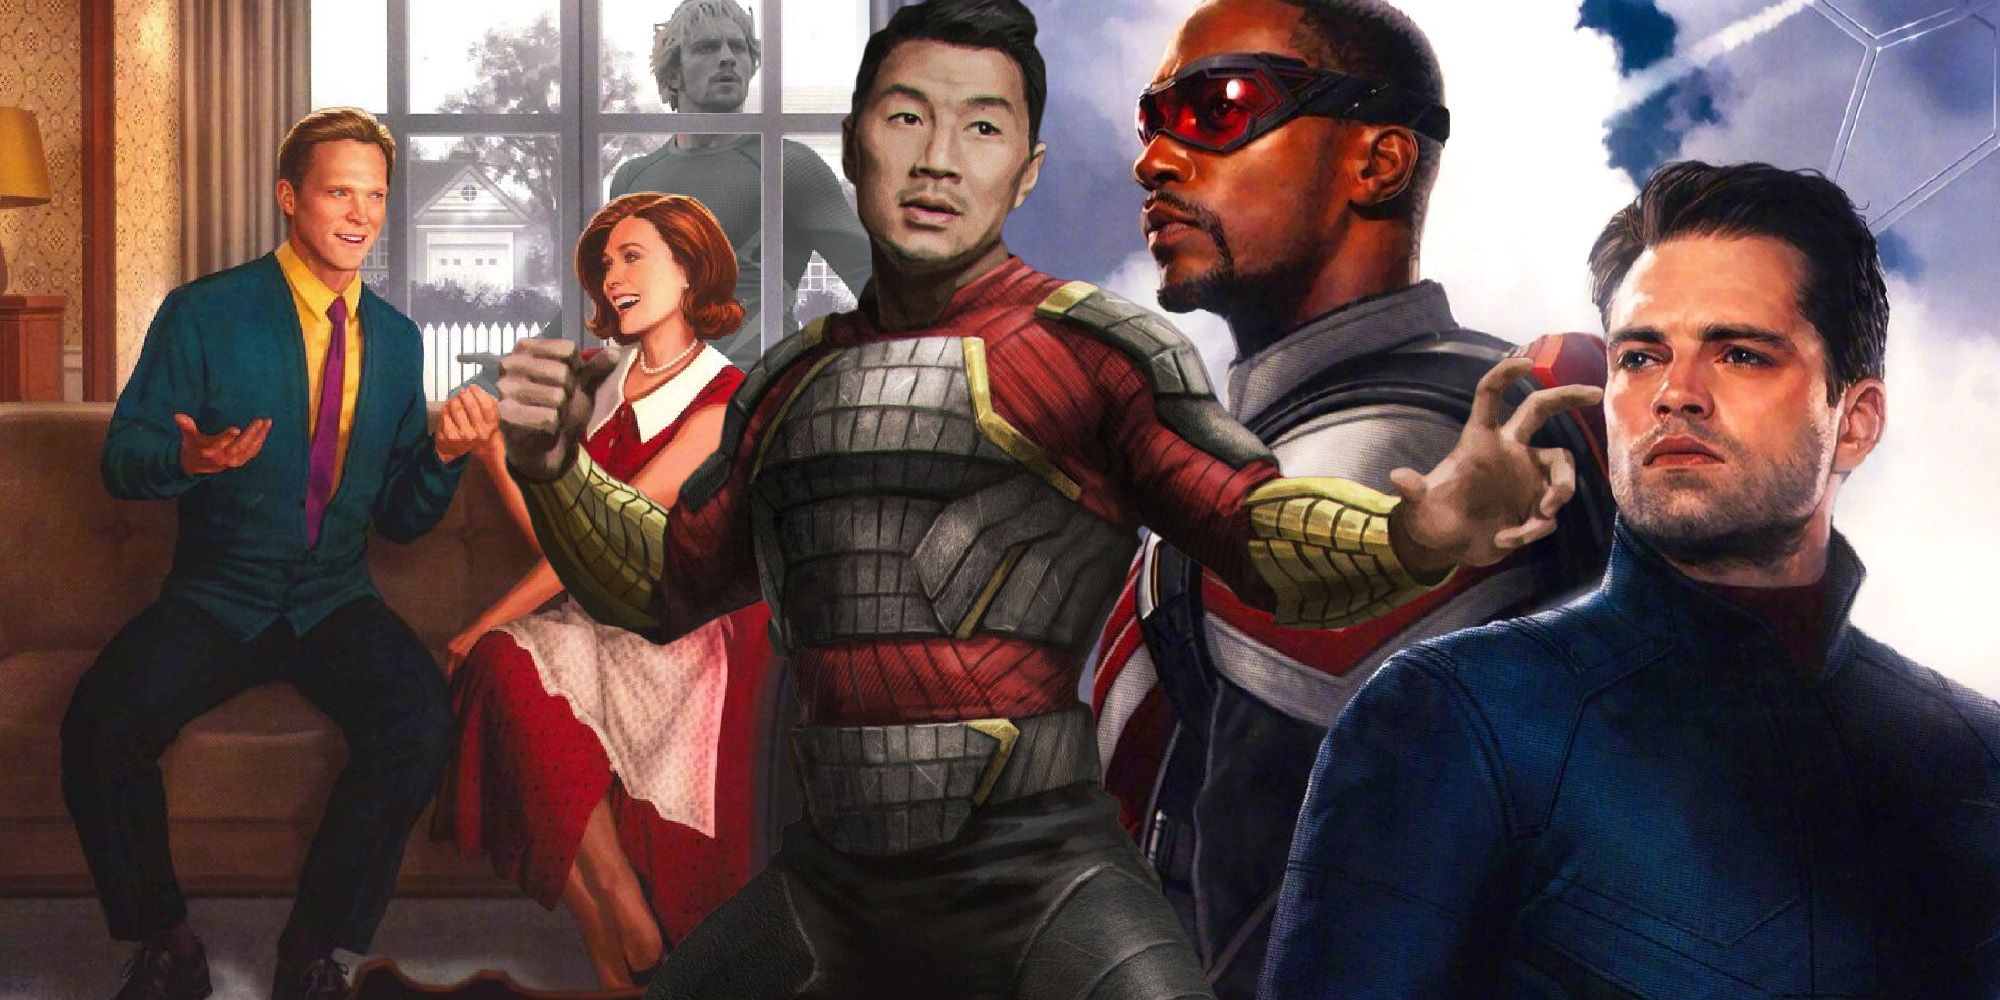 Shangchi Falcon and the winter soldier Wandavision